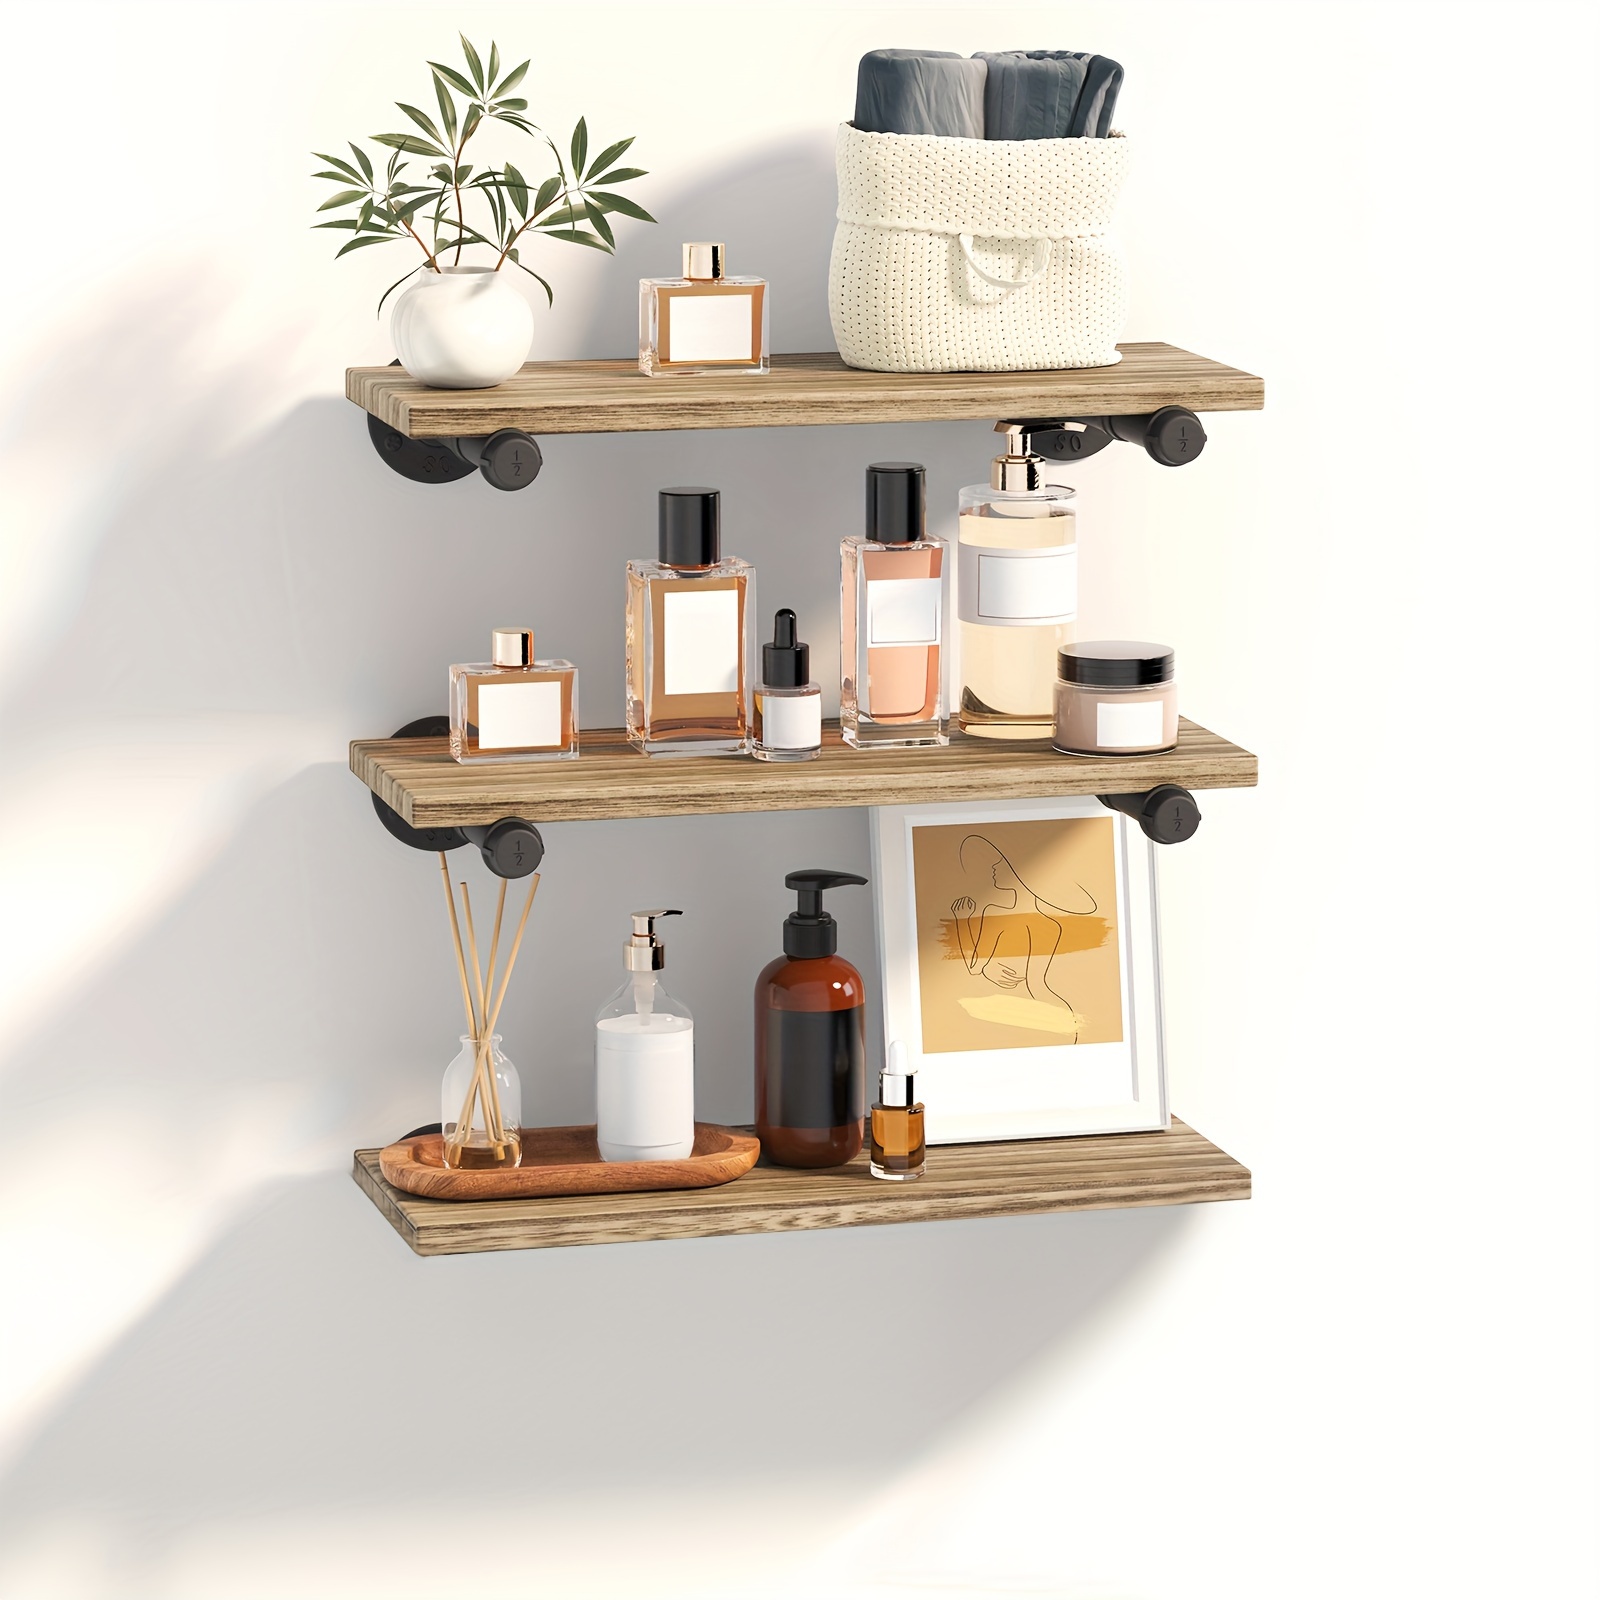 

Floating Bathroom Shelves, 3+1 Tier Rustic Farmhouse Pipe Wall Shelves, Bathroom Organizer Over Toilet With Wire Storage Basket, Provide Extra Shelf Space For Organizing Small Items (rustic Brown)